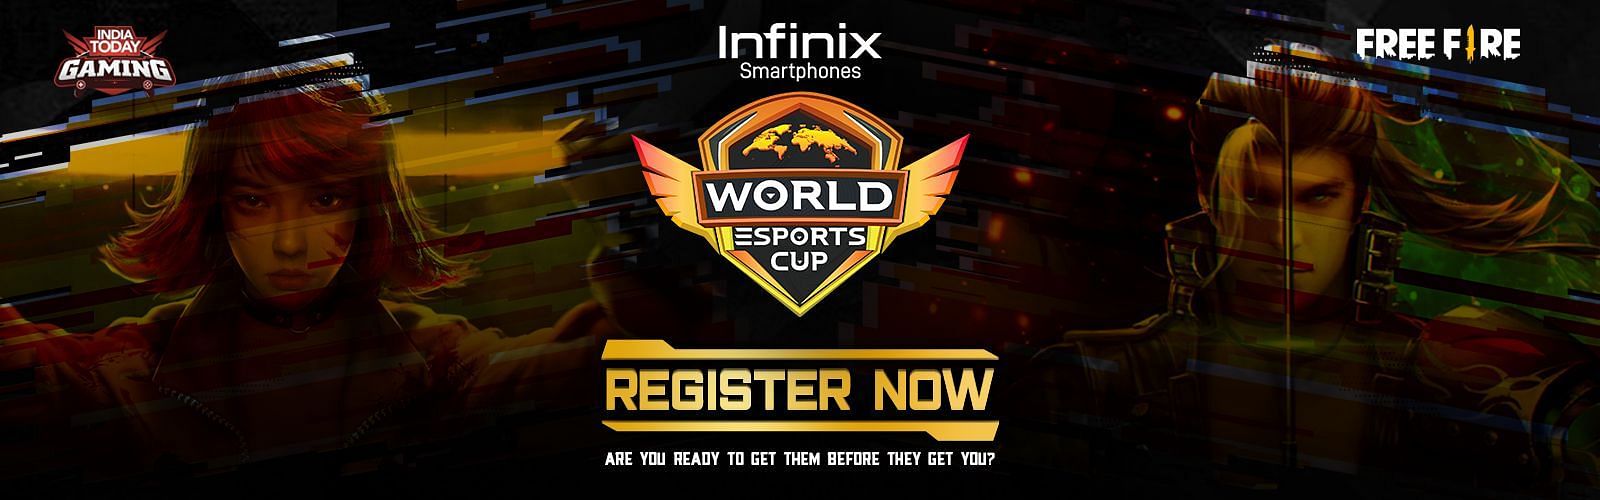 The India Finals of the World Esports Cup 2021 will be held today (Image via India Today Gaming)